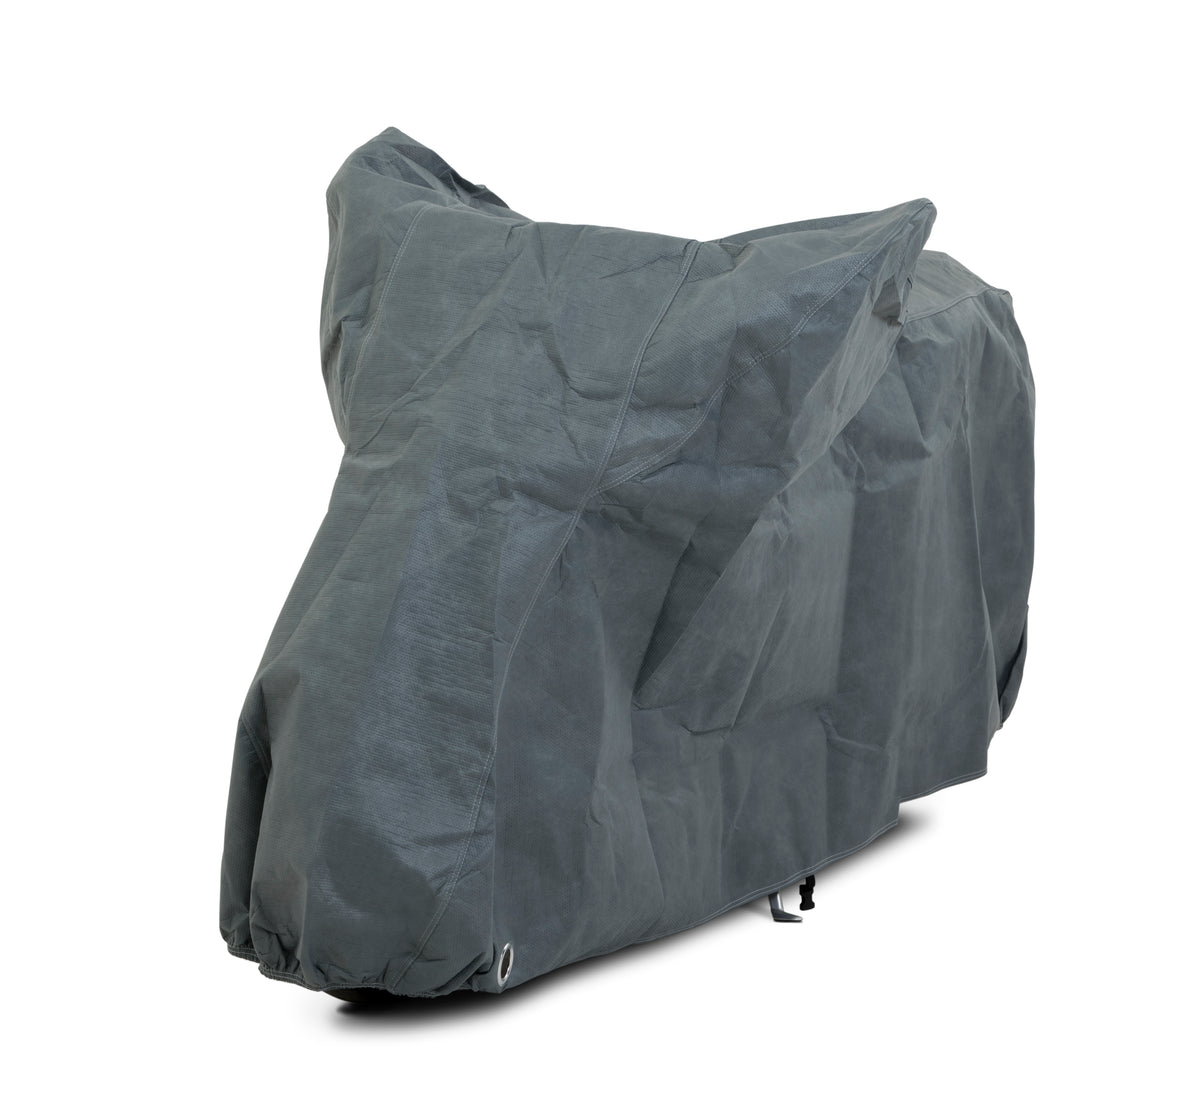 Stormforce best outdoor motorcycle covers for KAWASAKI